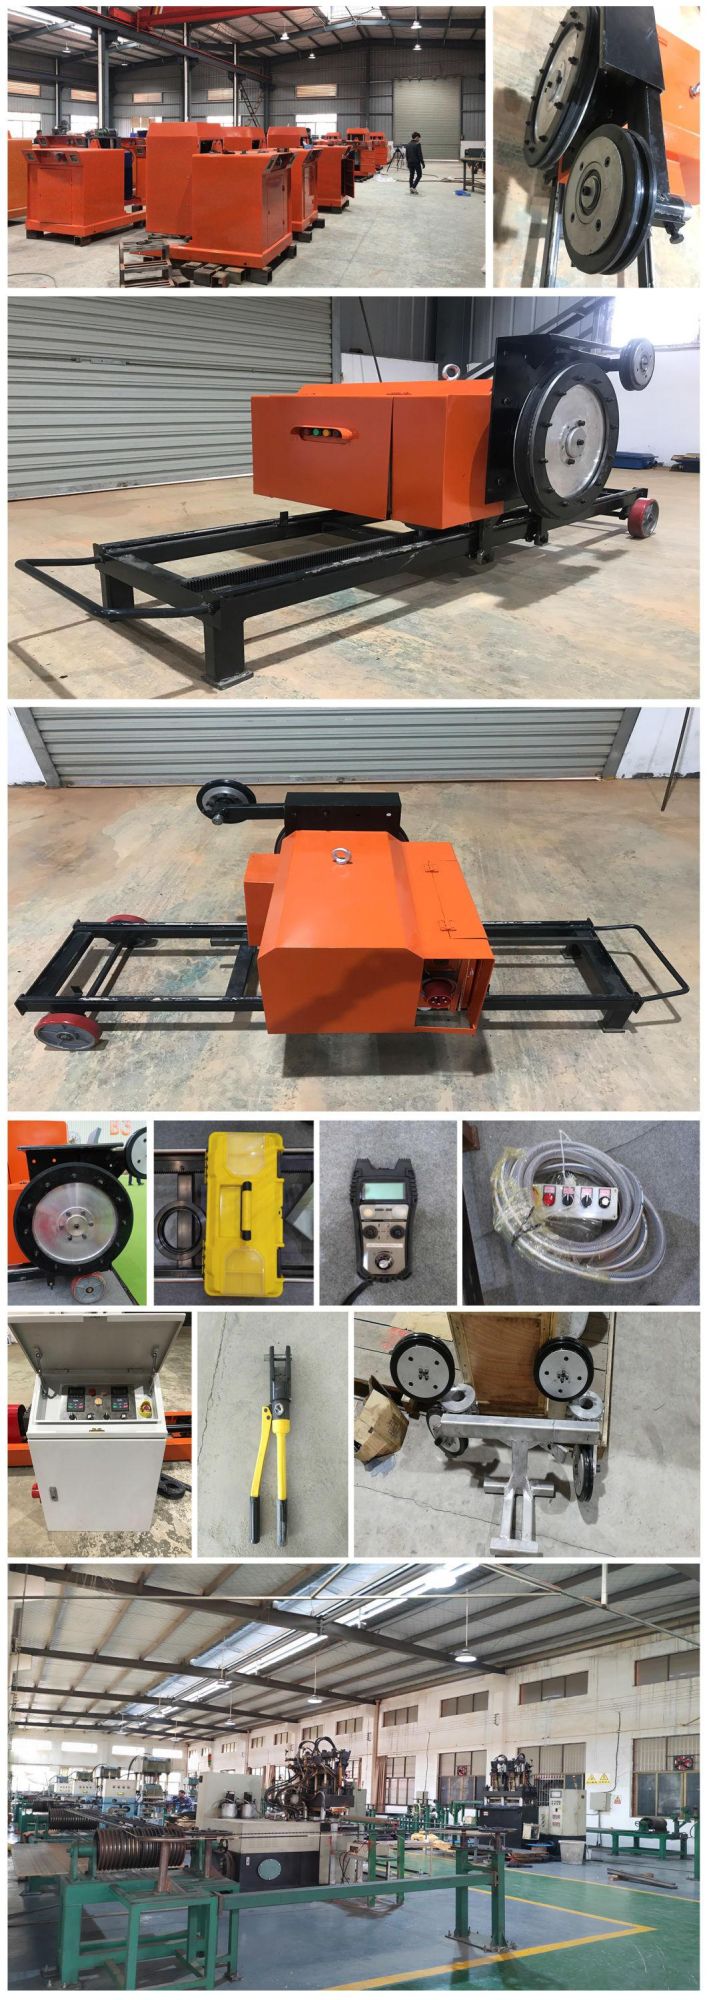 Fast Cutting Cutter for Reinforced Concrete Construct Demolition